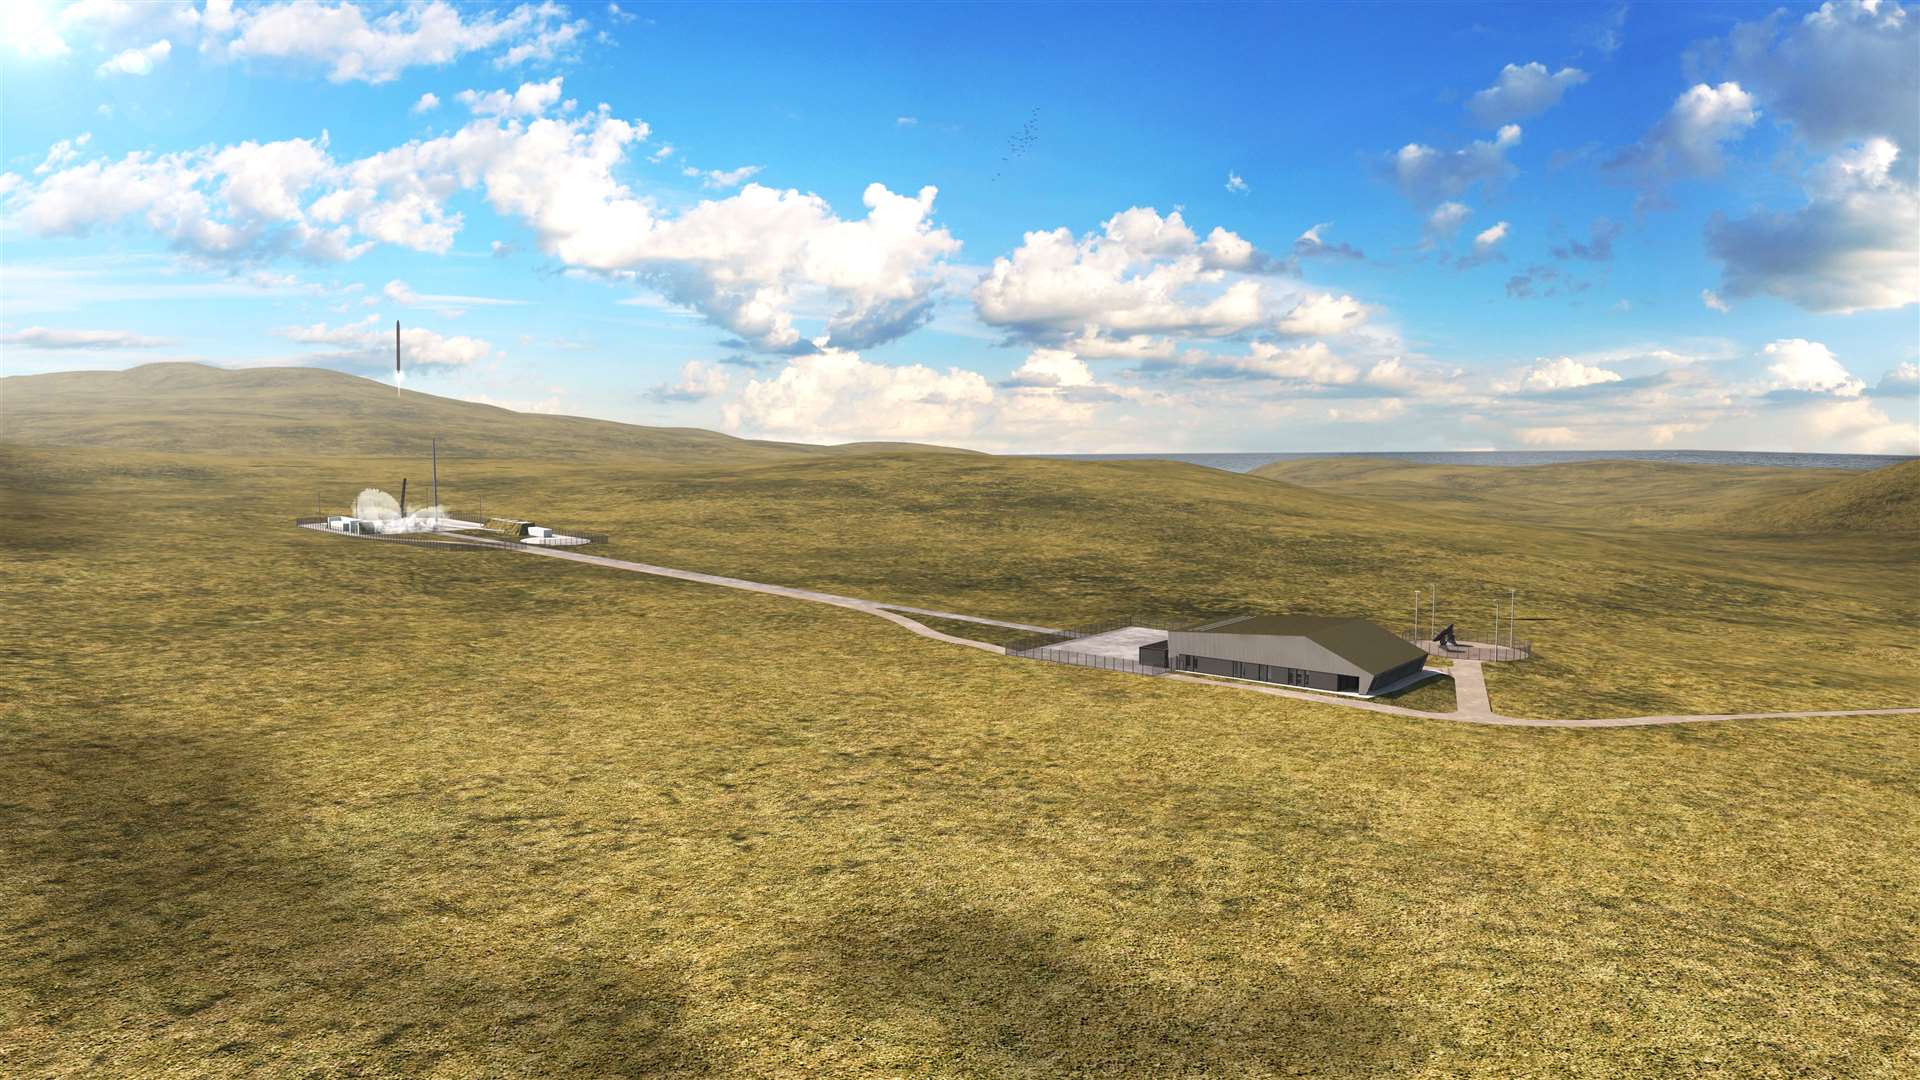 The Space Hub planned for Sutherland will bring wider opportunities to the north of Scotland.